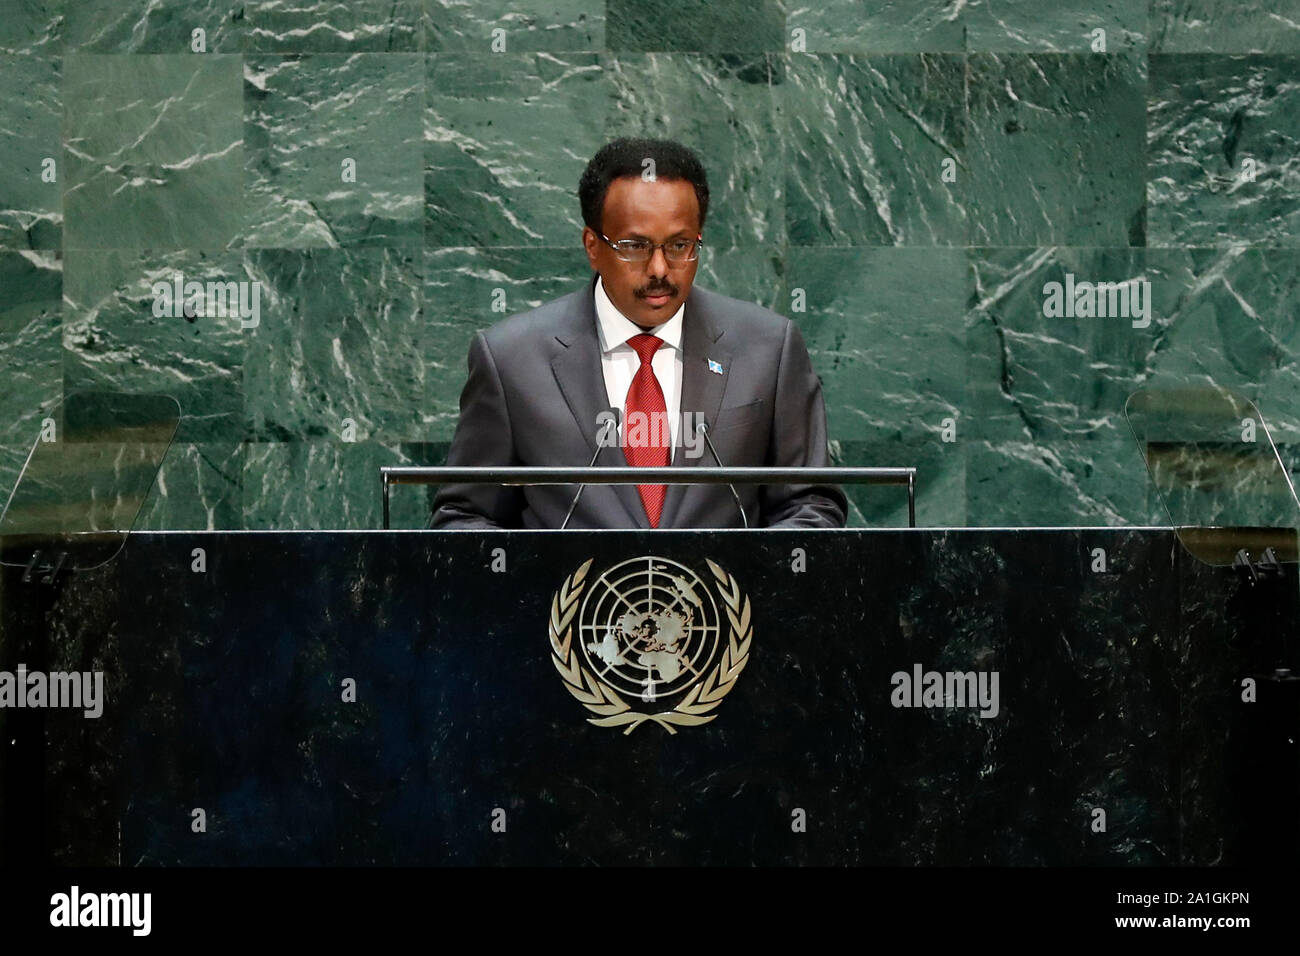 United Nations. 26th Sep, 2019. Somali President Mohamed Abdullahi Farmajo addresses the General Debate of the 74th session of the UN General Assembly at the UN headquarters in New York, on Sept. 26, 2019. Credit: Li Muzi/Xinhua/Alamy Live News Stock Photo